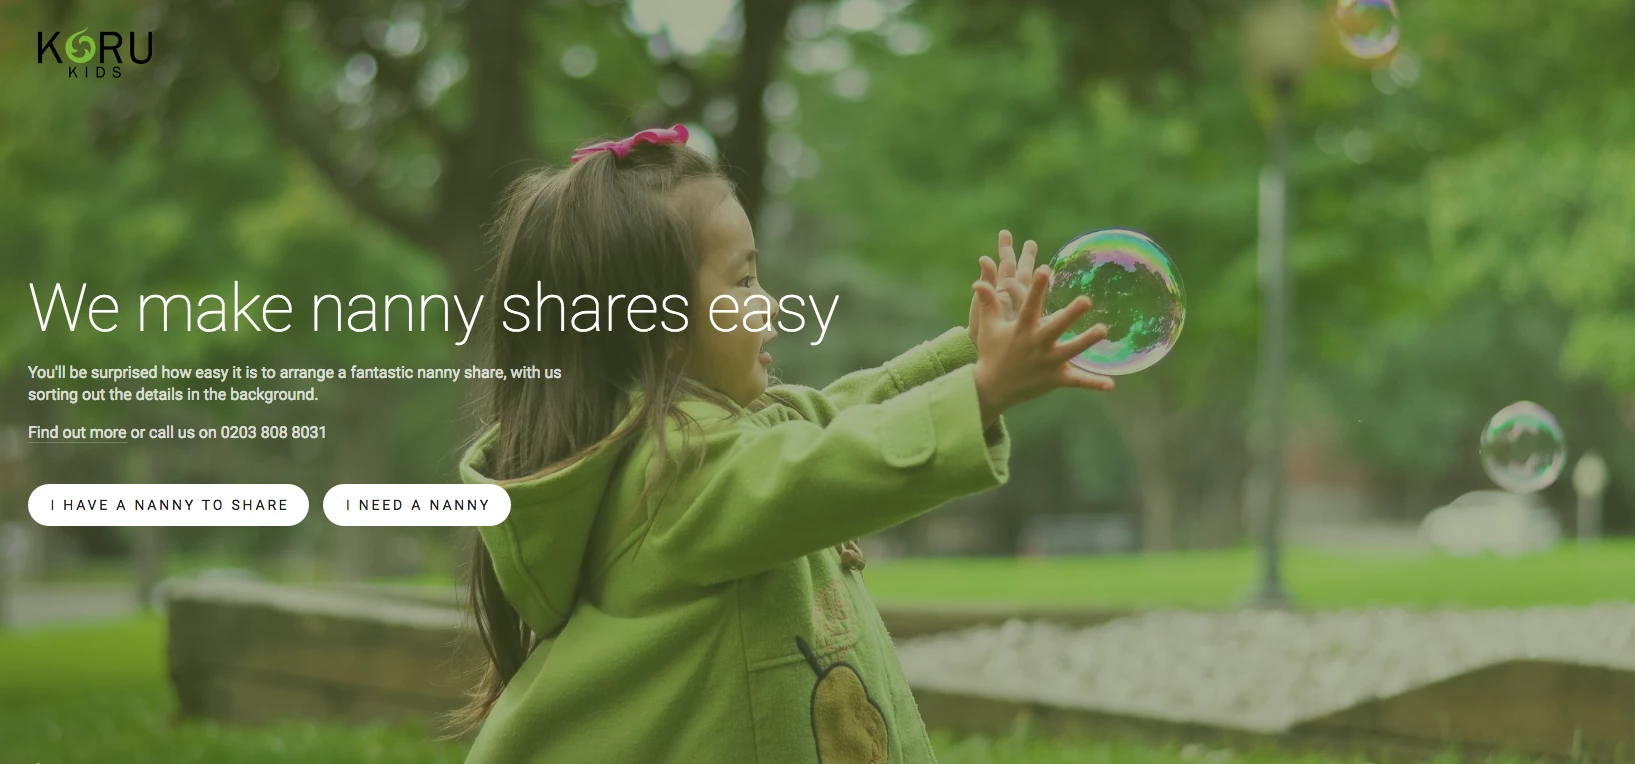 Koru Kids has officially launched today following a £600k seed round.